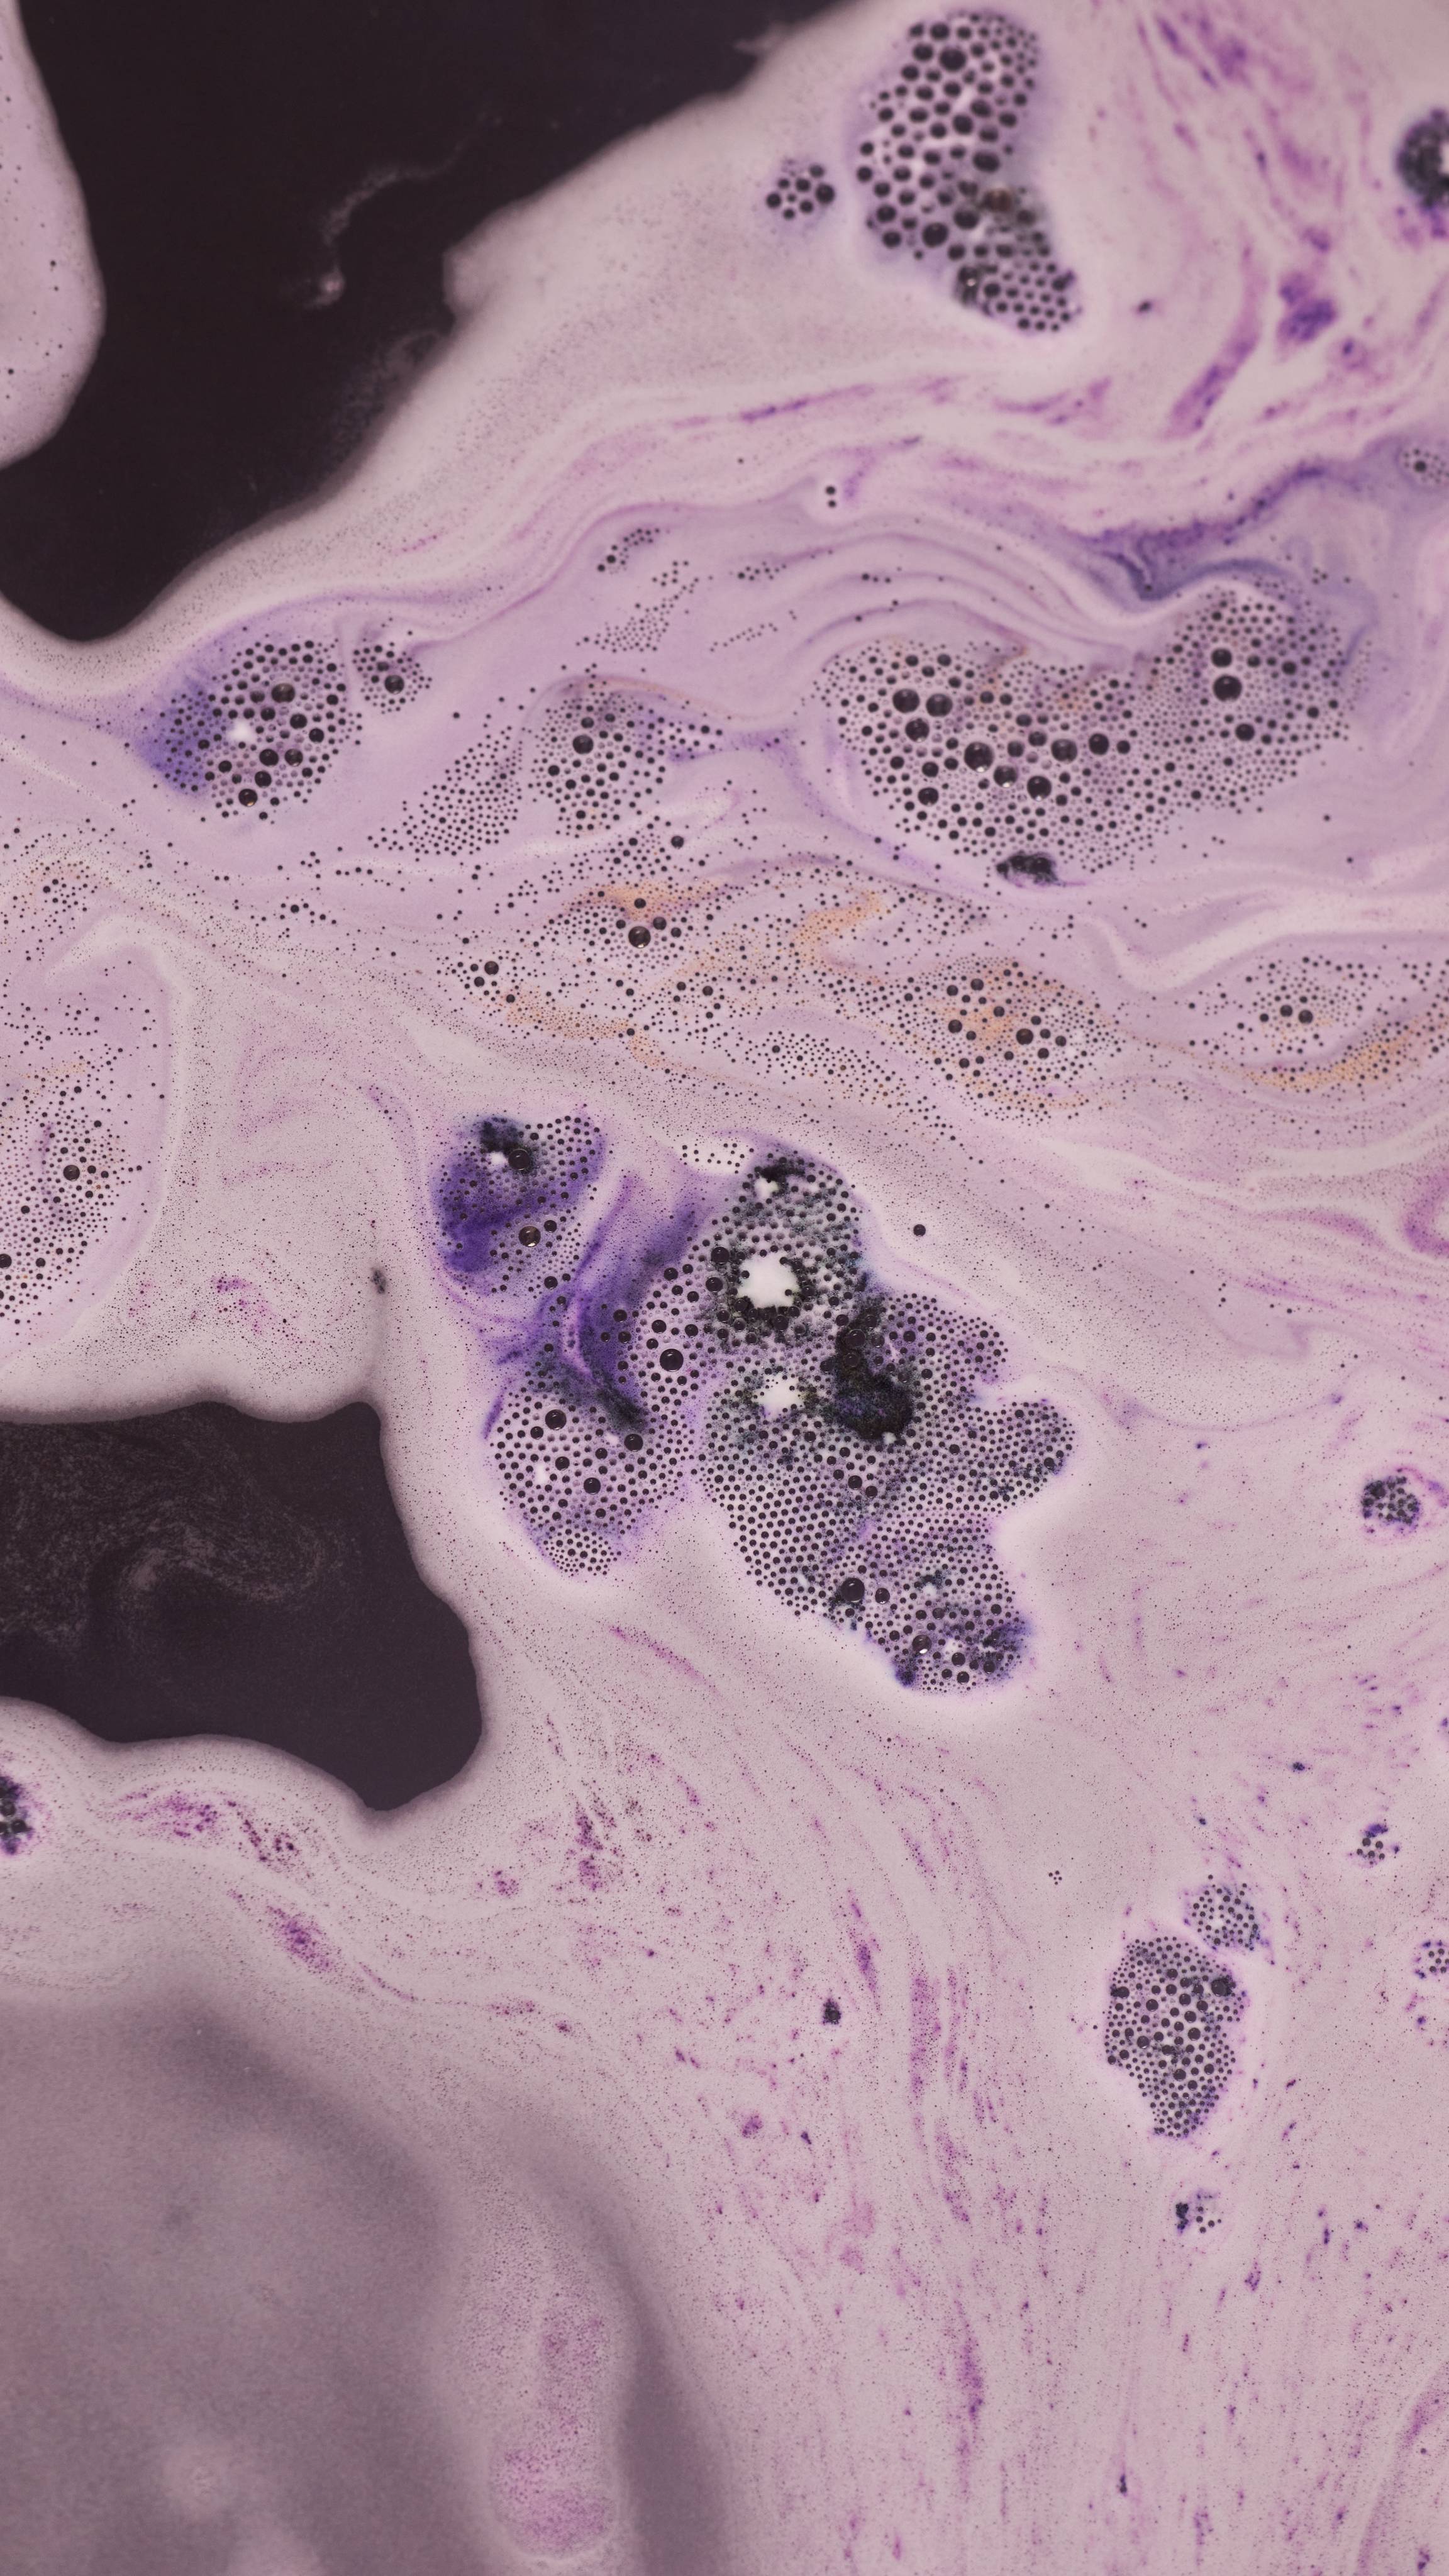 The Lump of Coal bath bomb has fully dissolved leaving a velvety sea of almost-black, deep purple ripples.